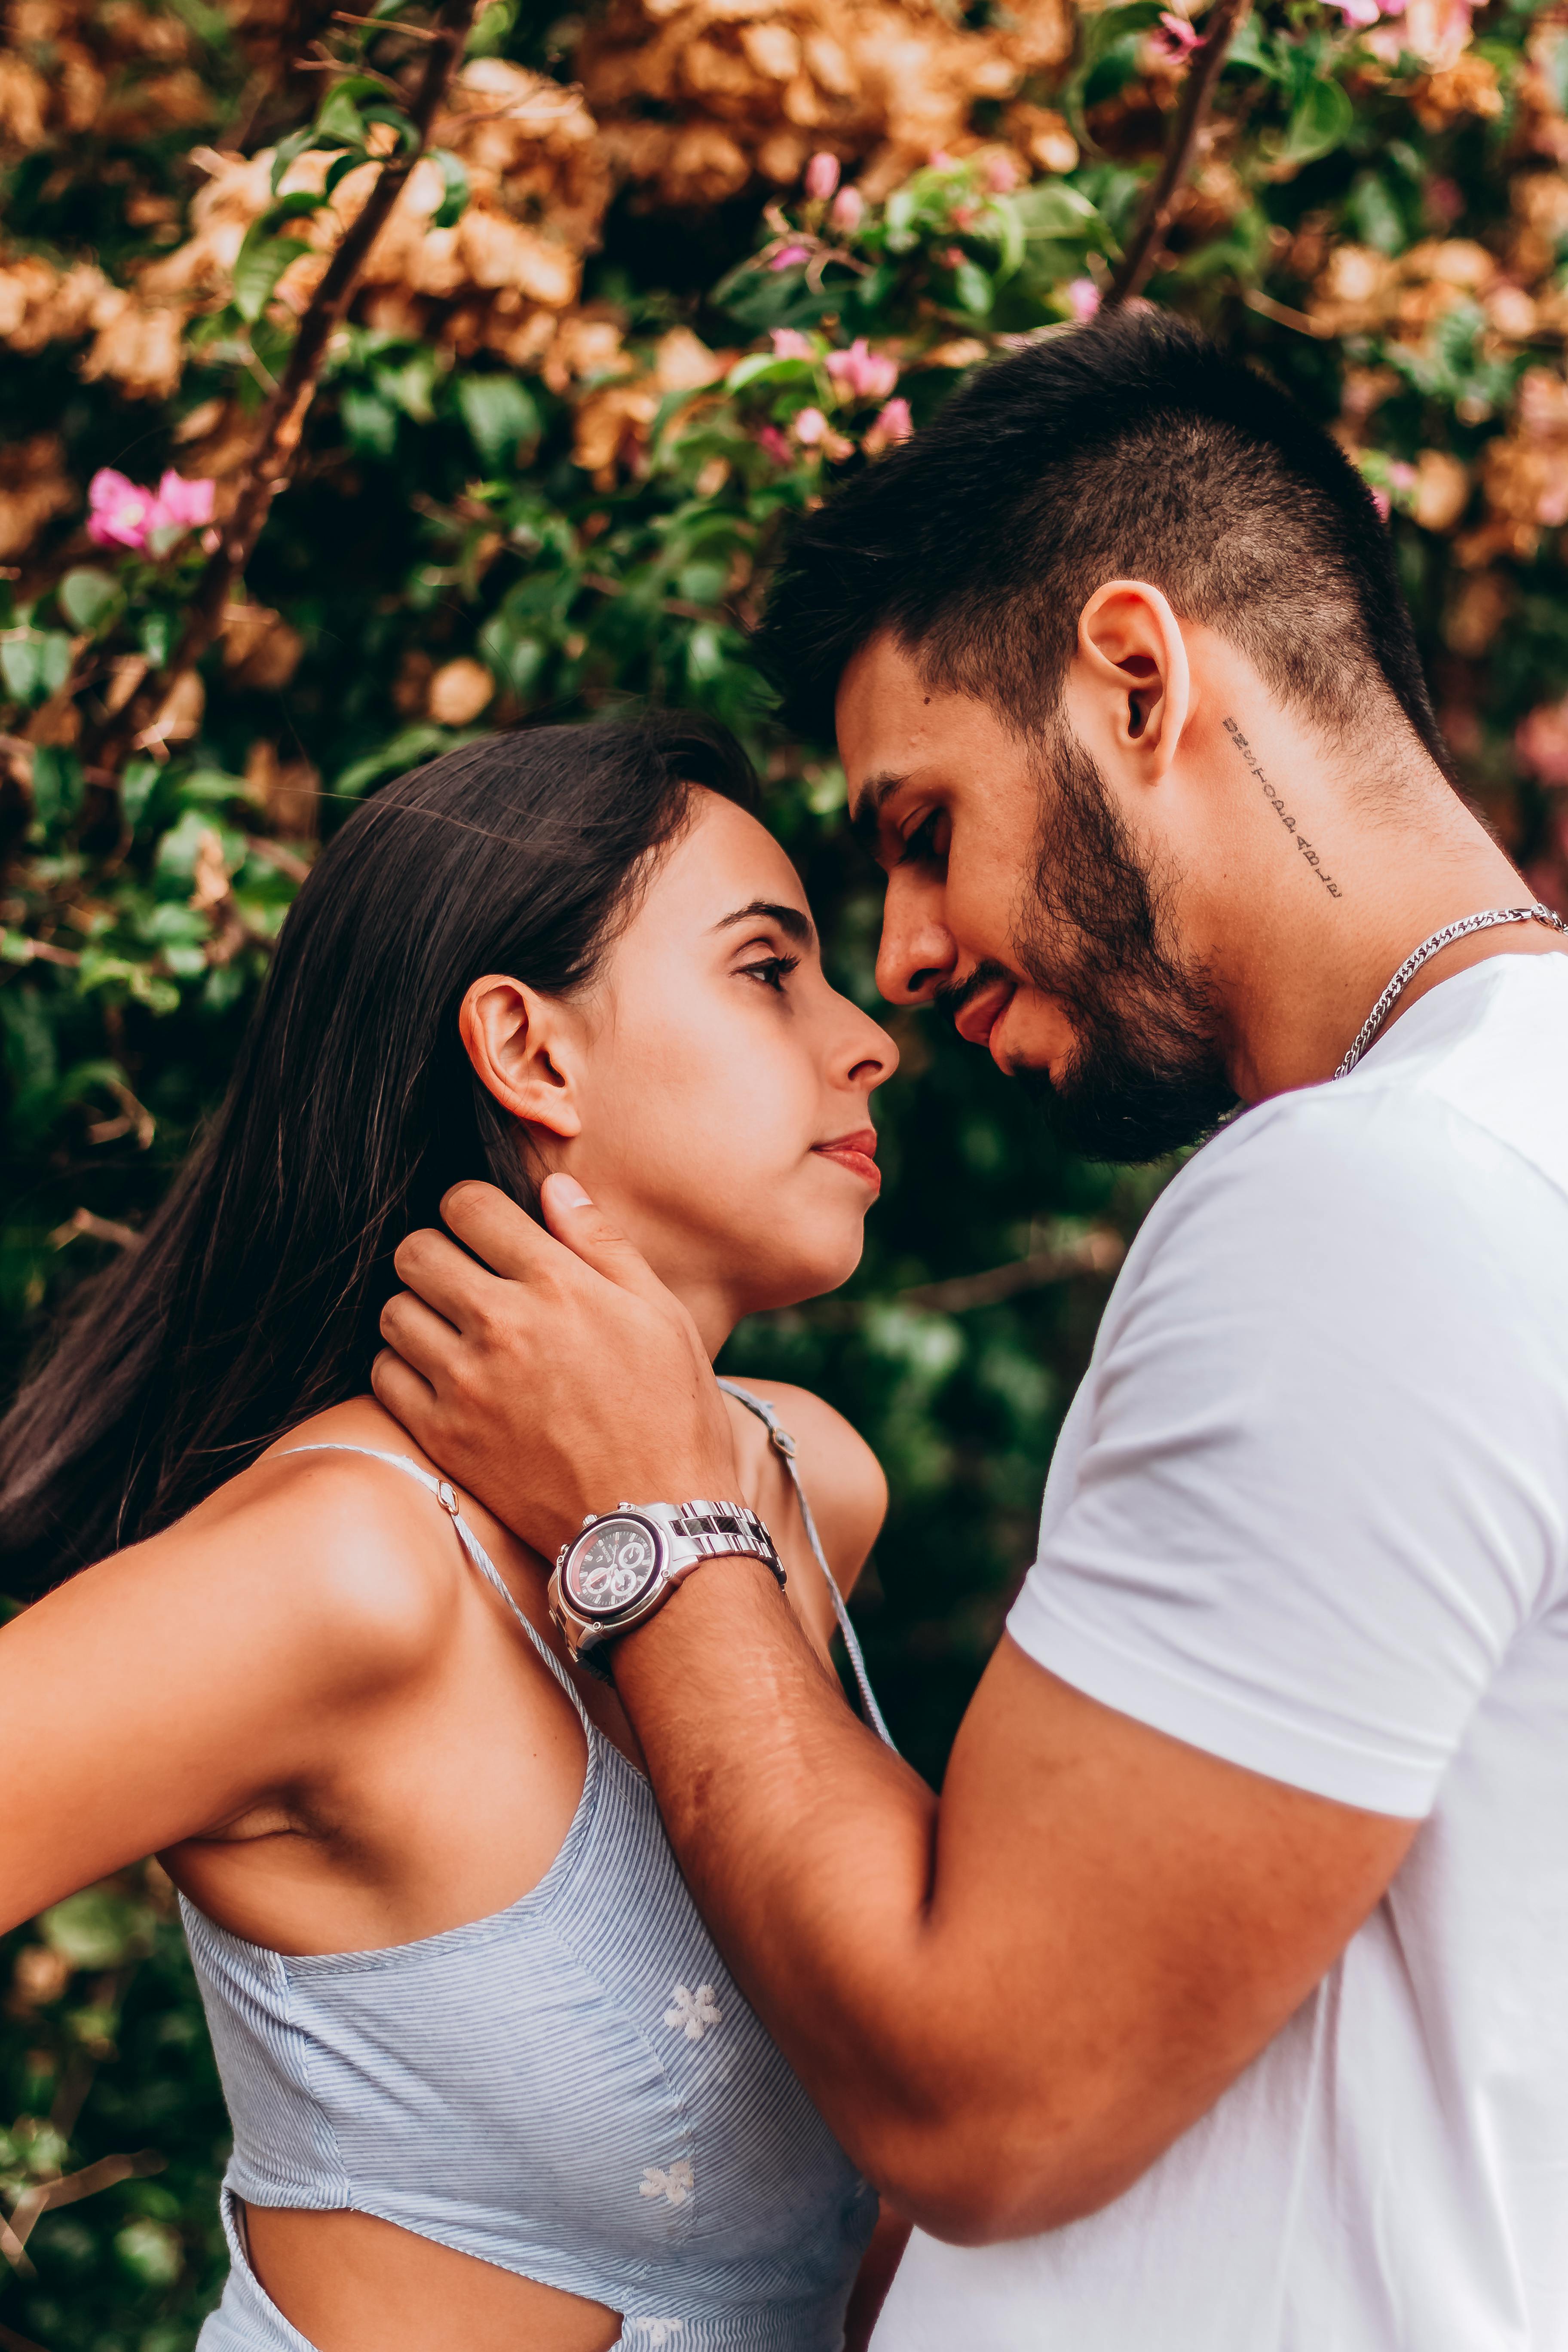 Free Photos - A Man And A Woman, Likely A Couple, Standing Close To Each  Other And Embracing In A Warm, Affectionate Hug. The Pair Appears To Be  Enjoying A Moment Of